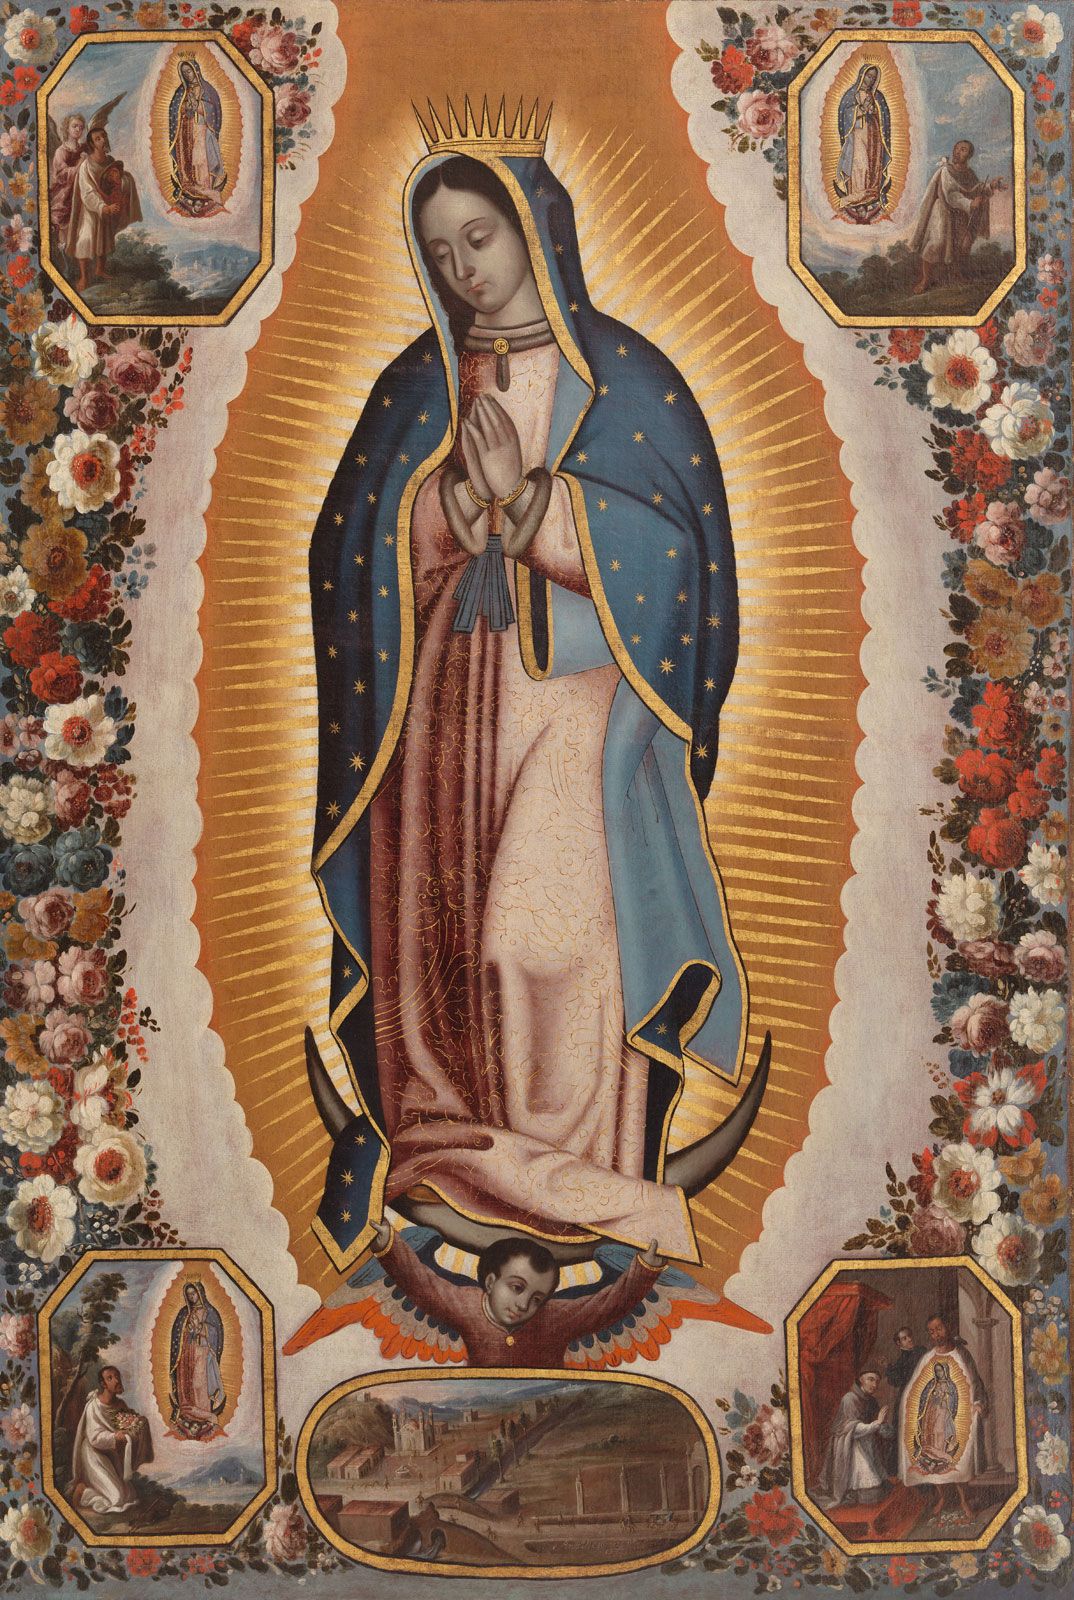 Our Lady of Guadalupe. Description, History, & Facts